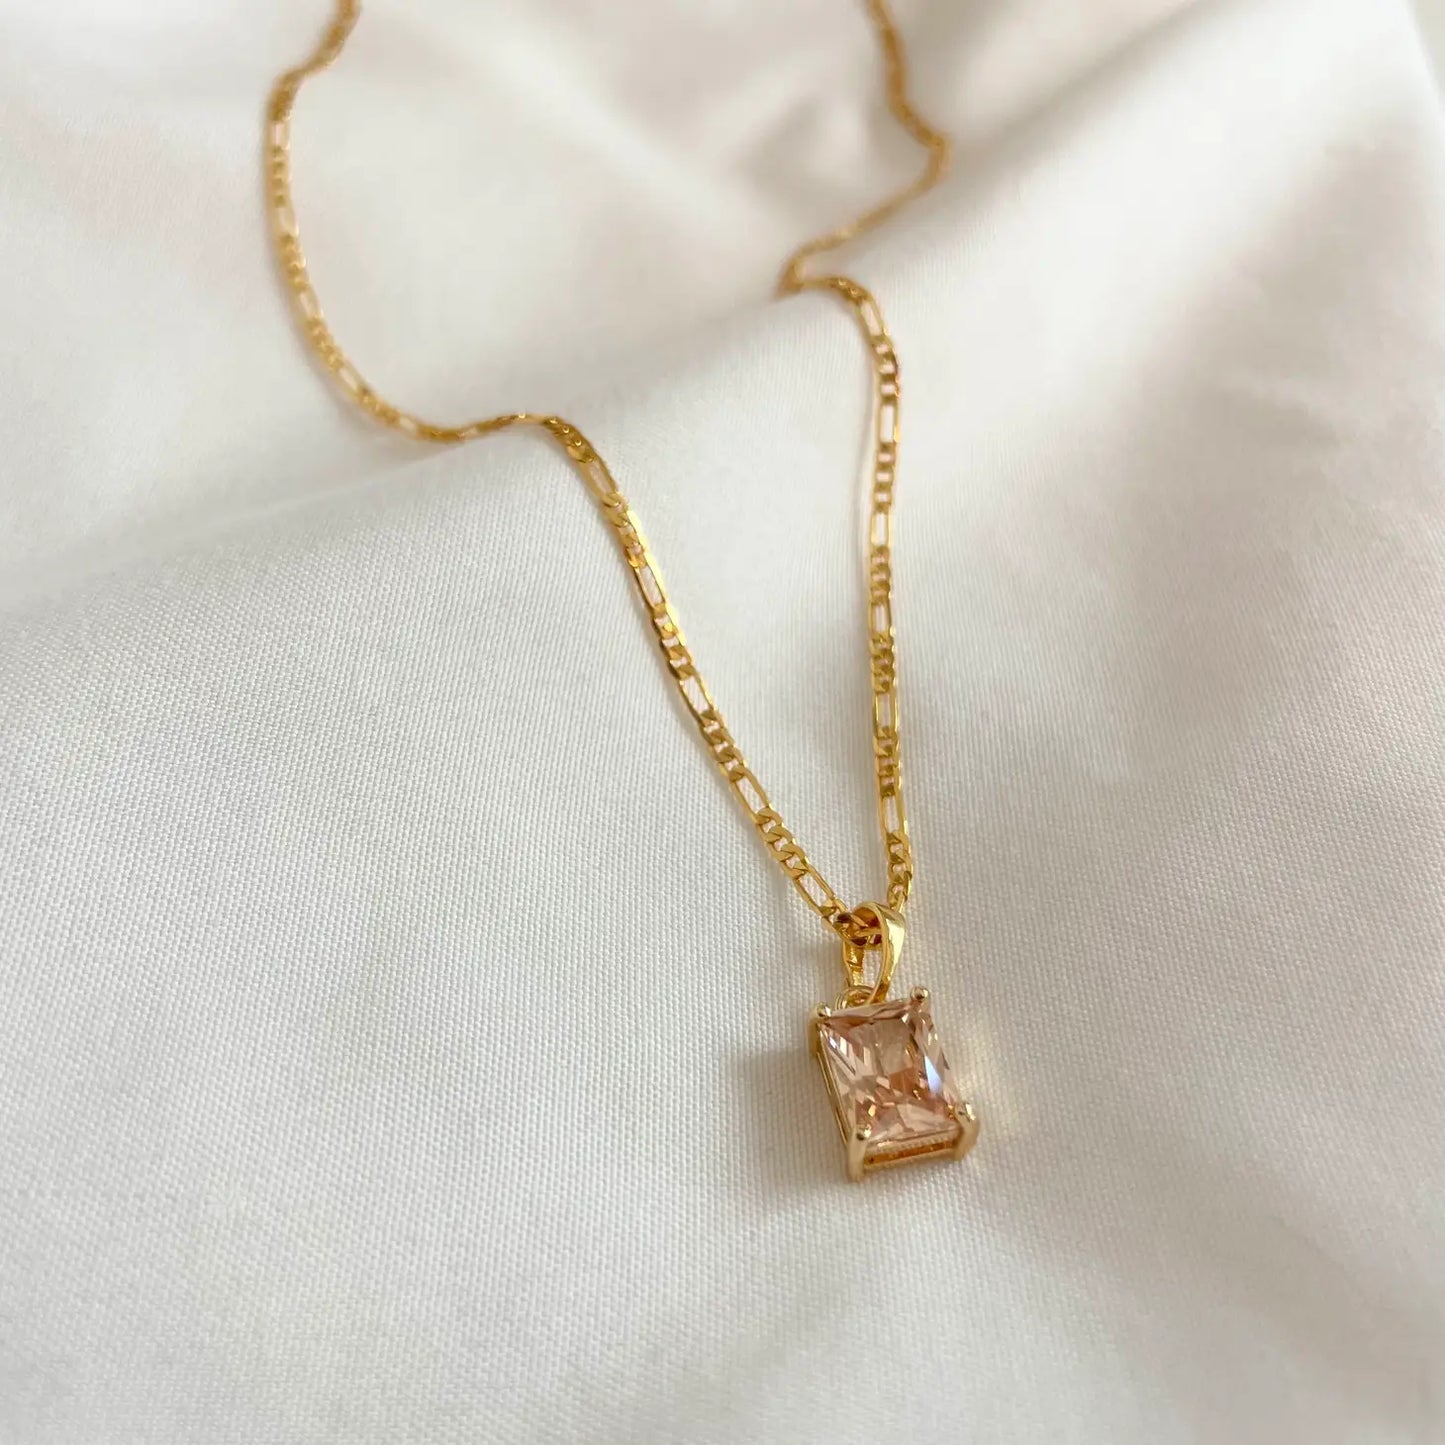 Peach Faceted Stone Necklace